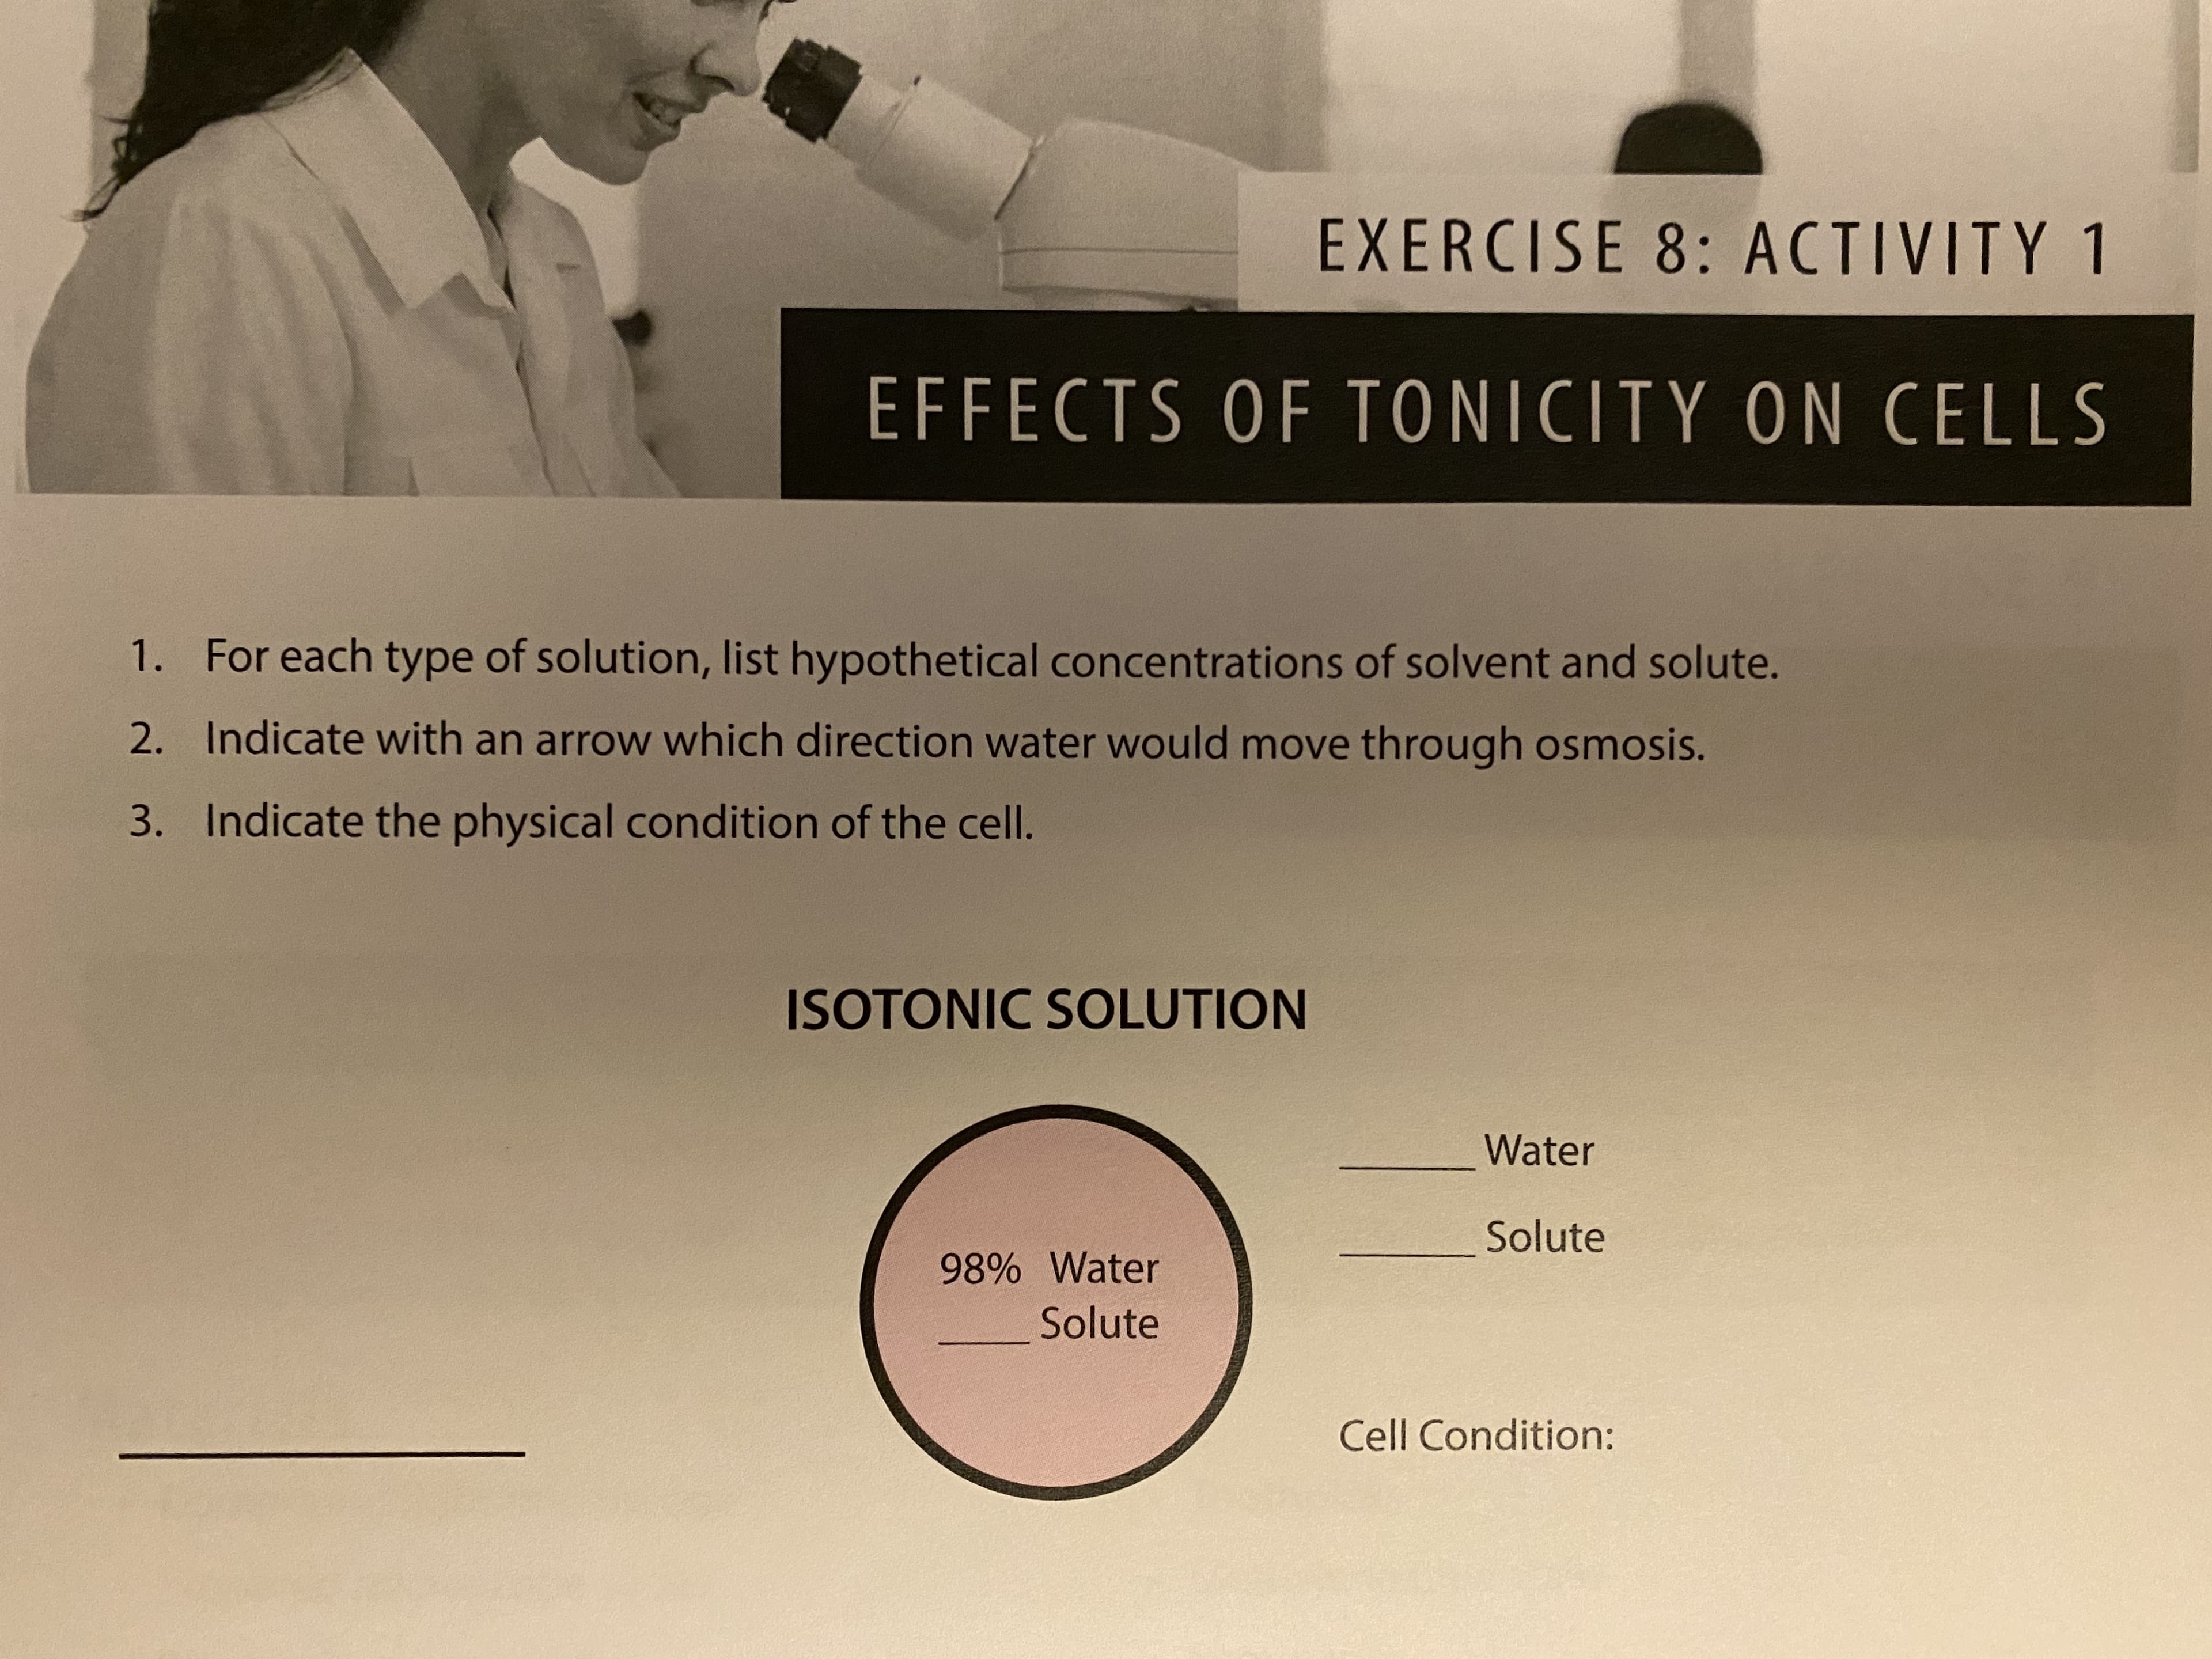 EXERCISE 8: ACTIVITY 1
EFFECTS OF TONICITY ON CELLS
1. For each type of solution, list hypothetical concentrations of solvent and solute.
2. Indicate with an arrow which direction water would move through osmosis.
3. Indicate the physical condition of the cell.
ISOTONIC SOLUTION
Water
Solute
98% Water
Solute
Cell Condition:
